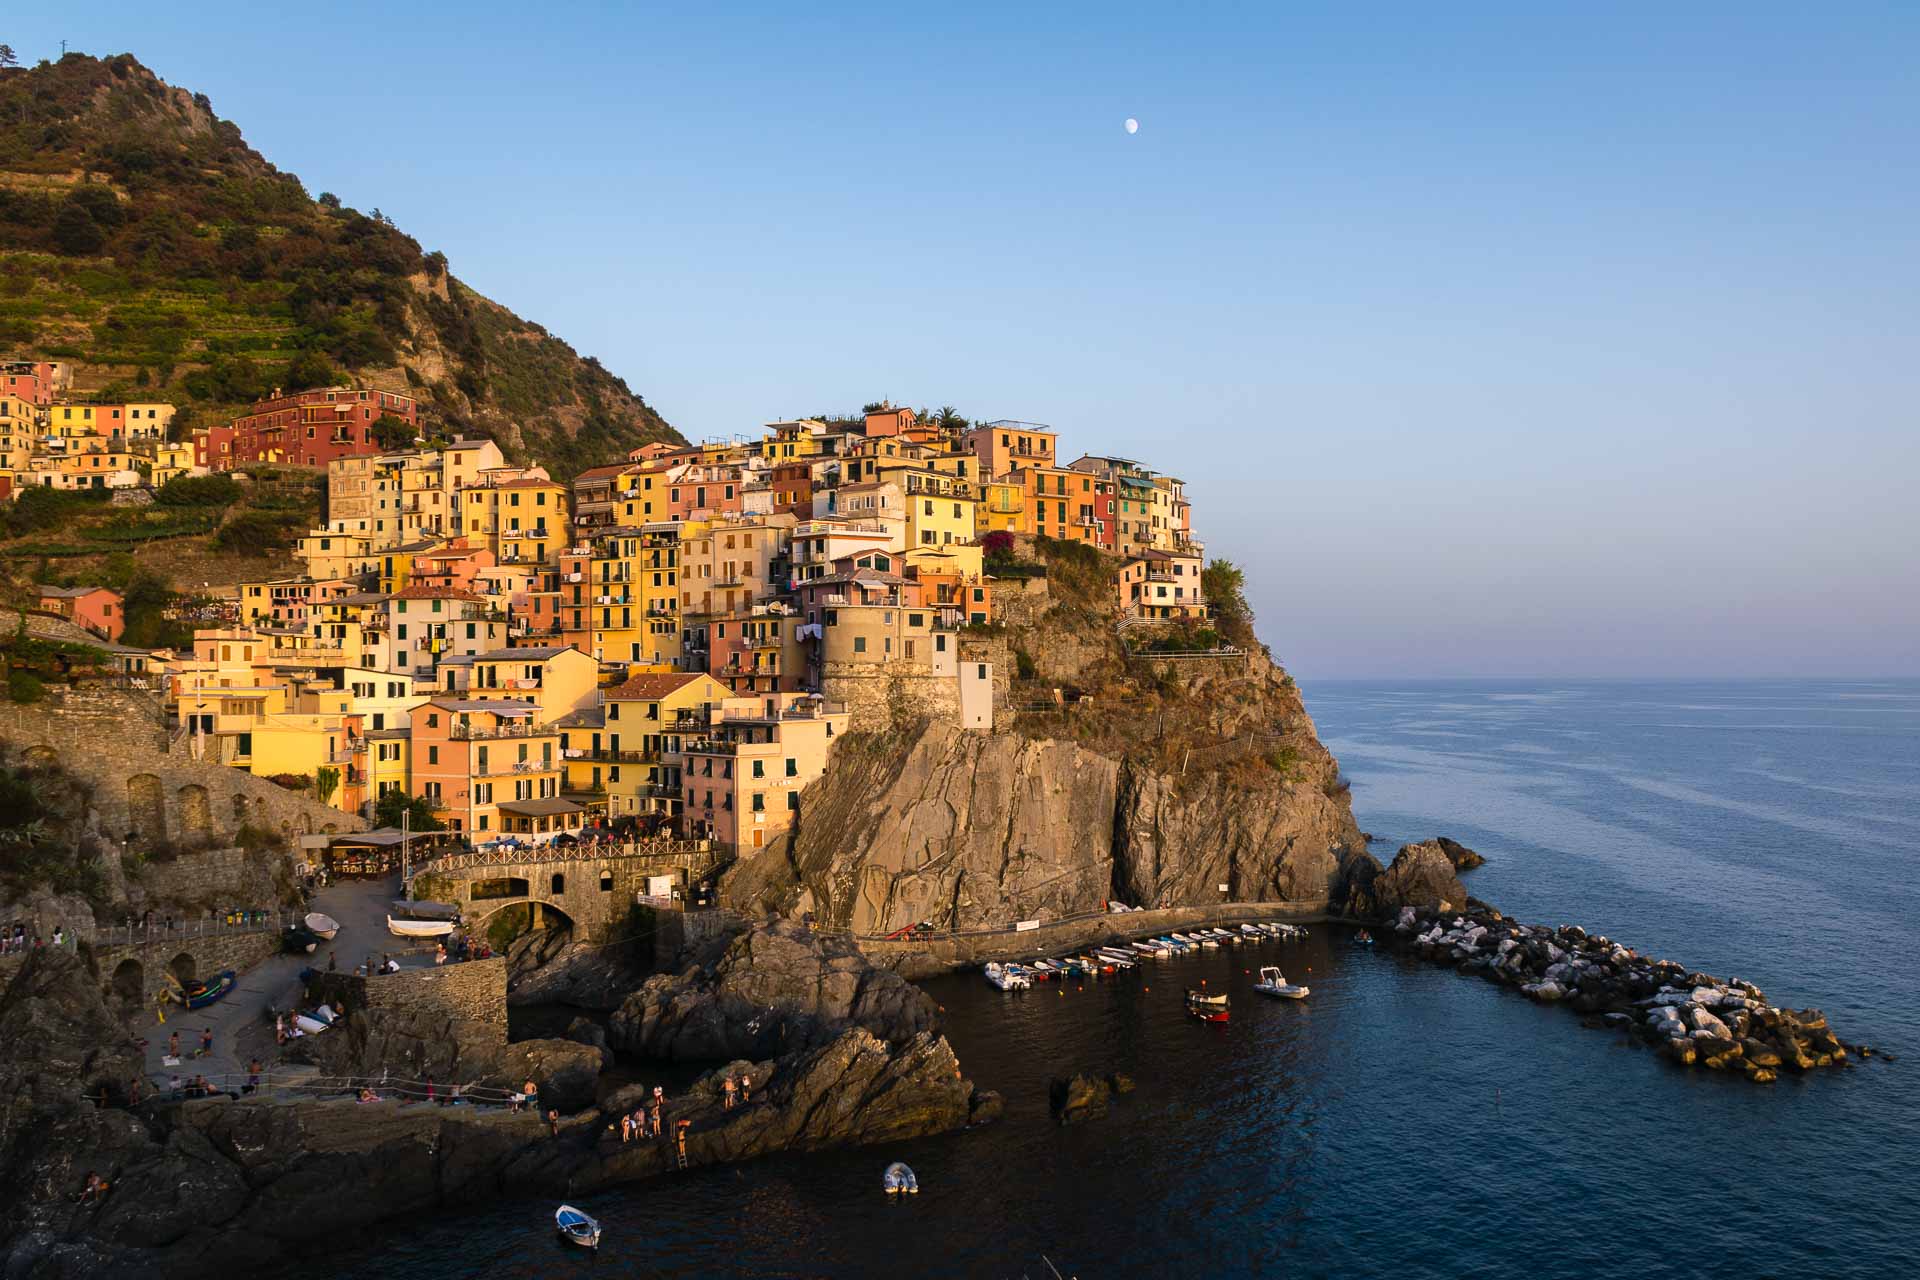 The Cinque Terre in Italy illuminated by the sun at dusk